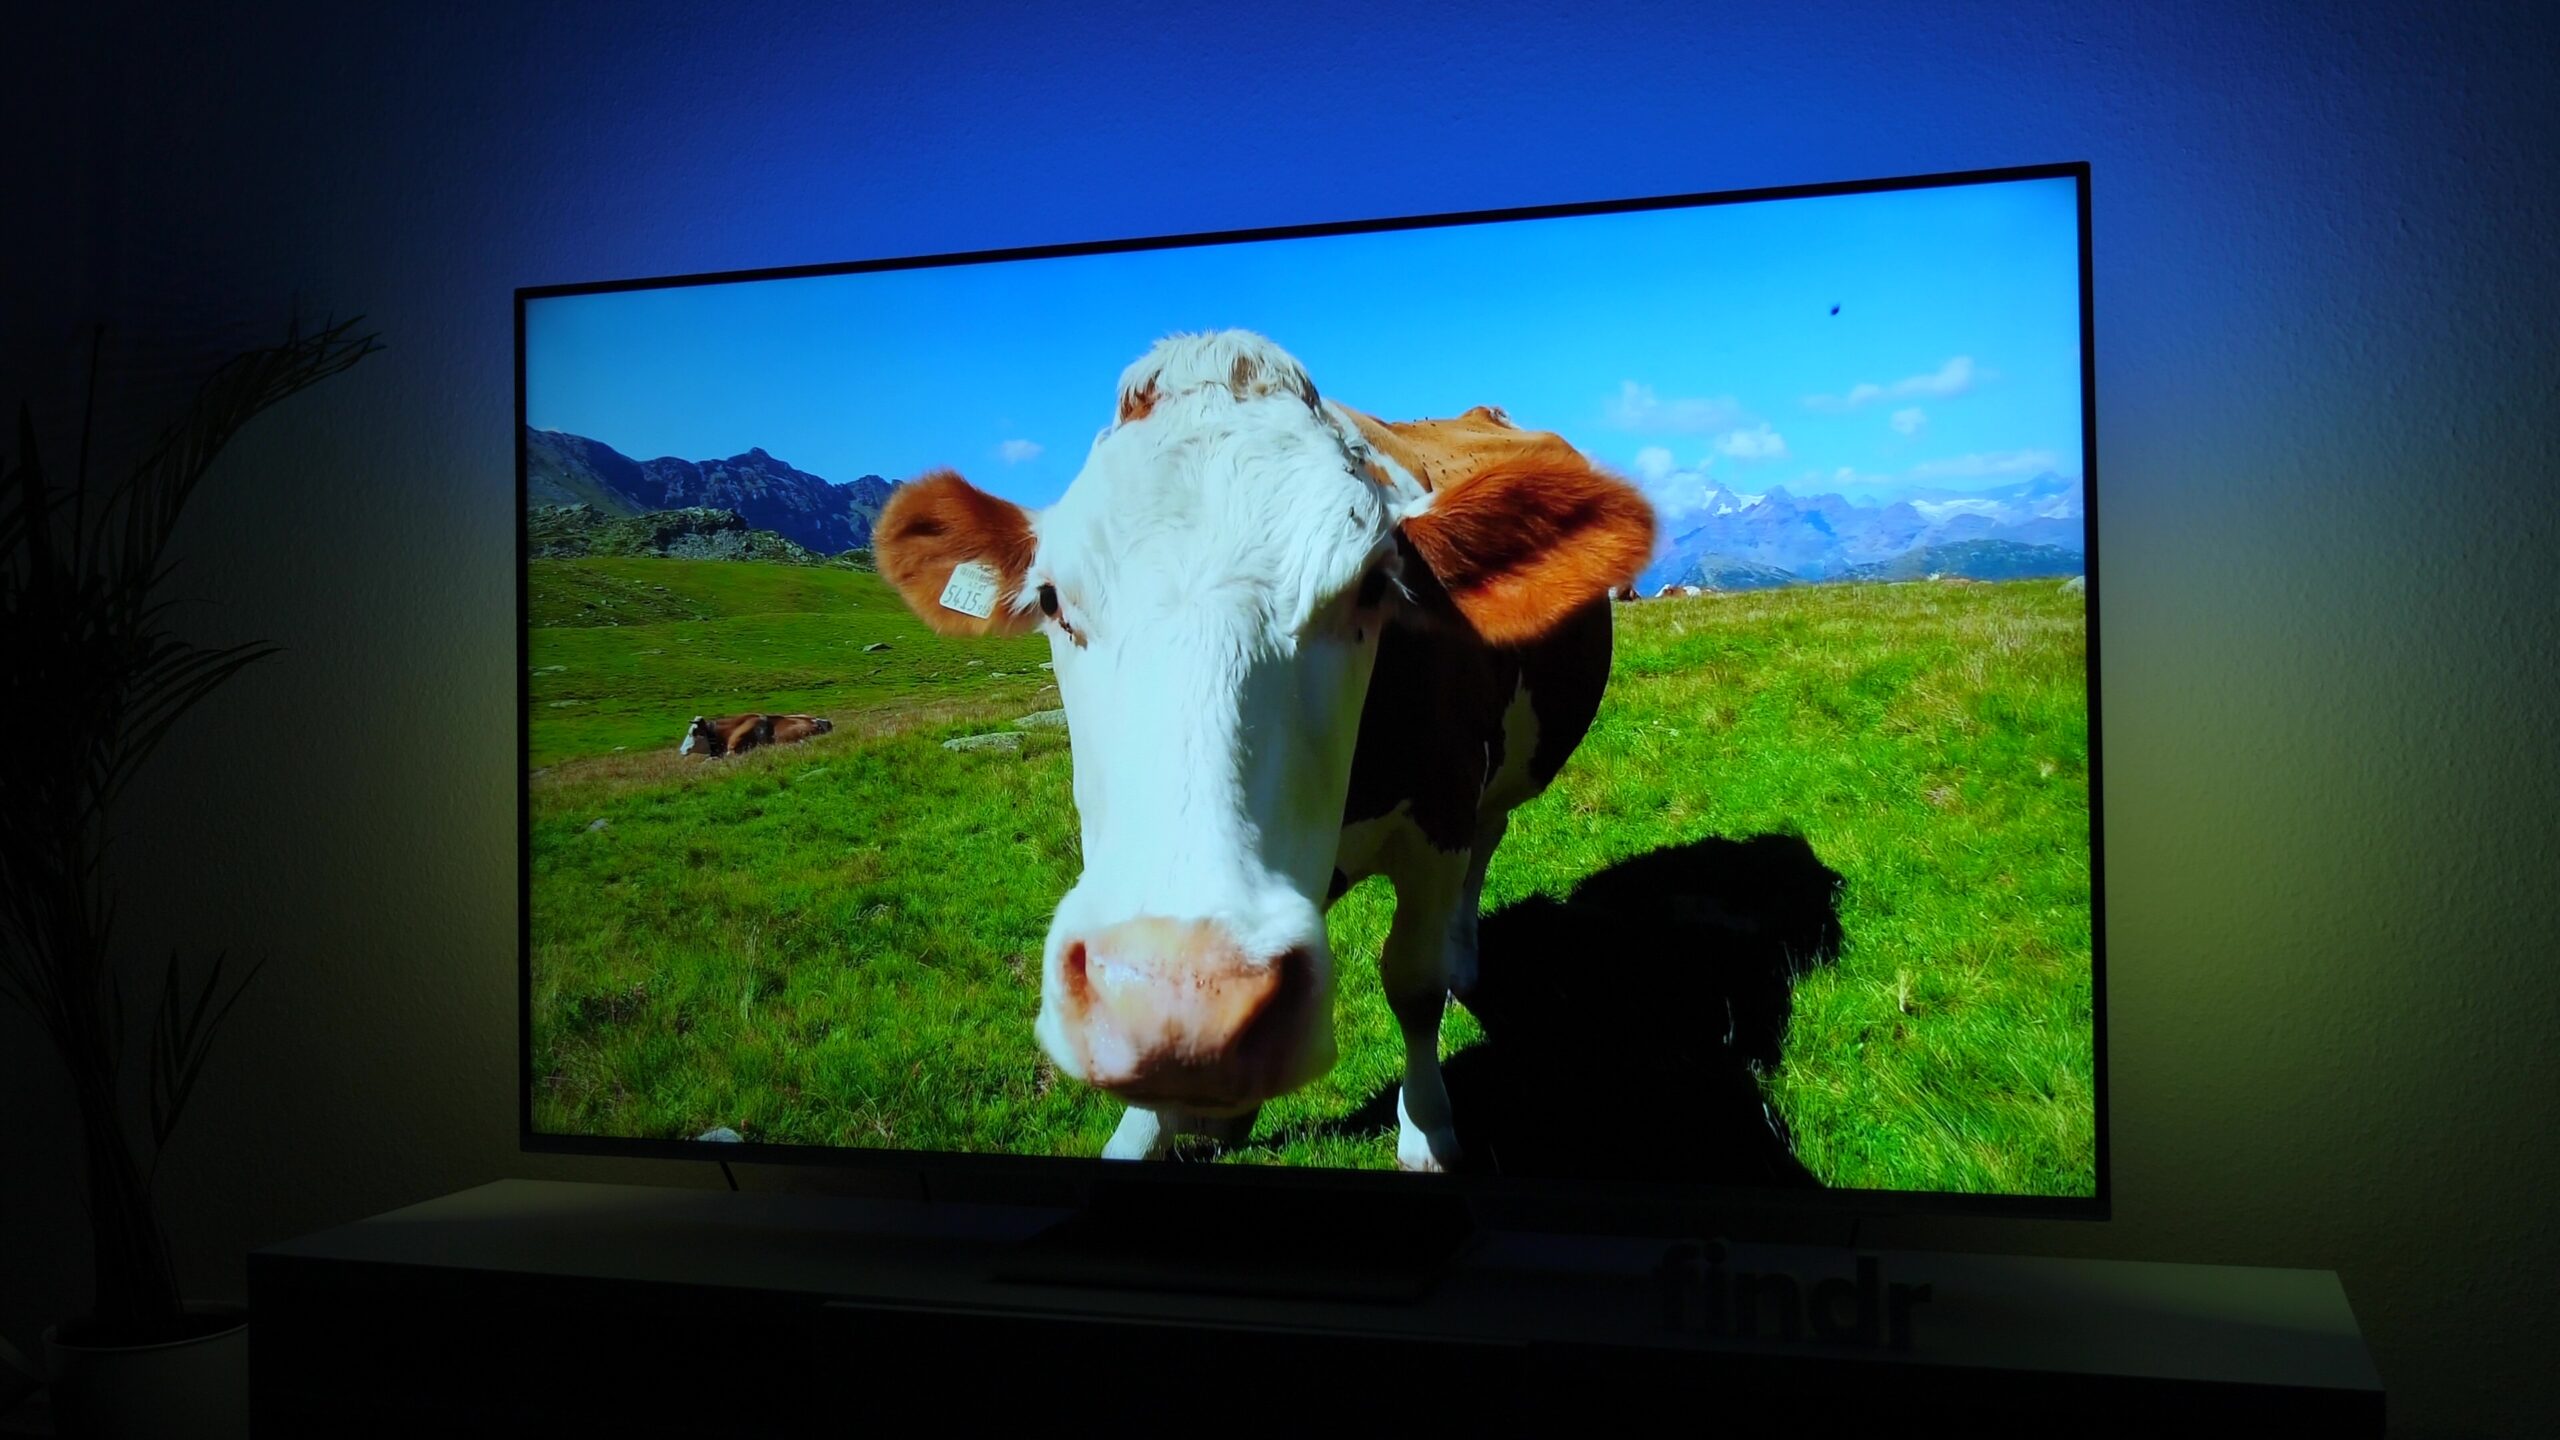 The One Android TV LED 4K UHD 55PUS8807/12